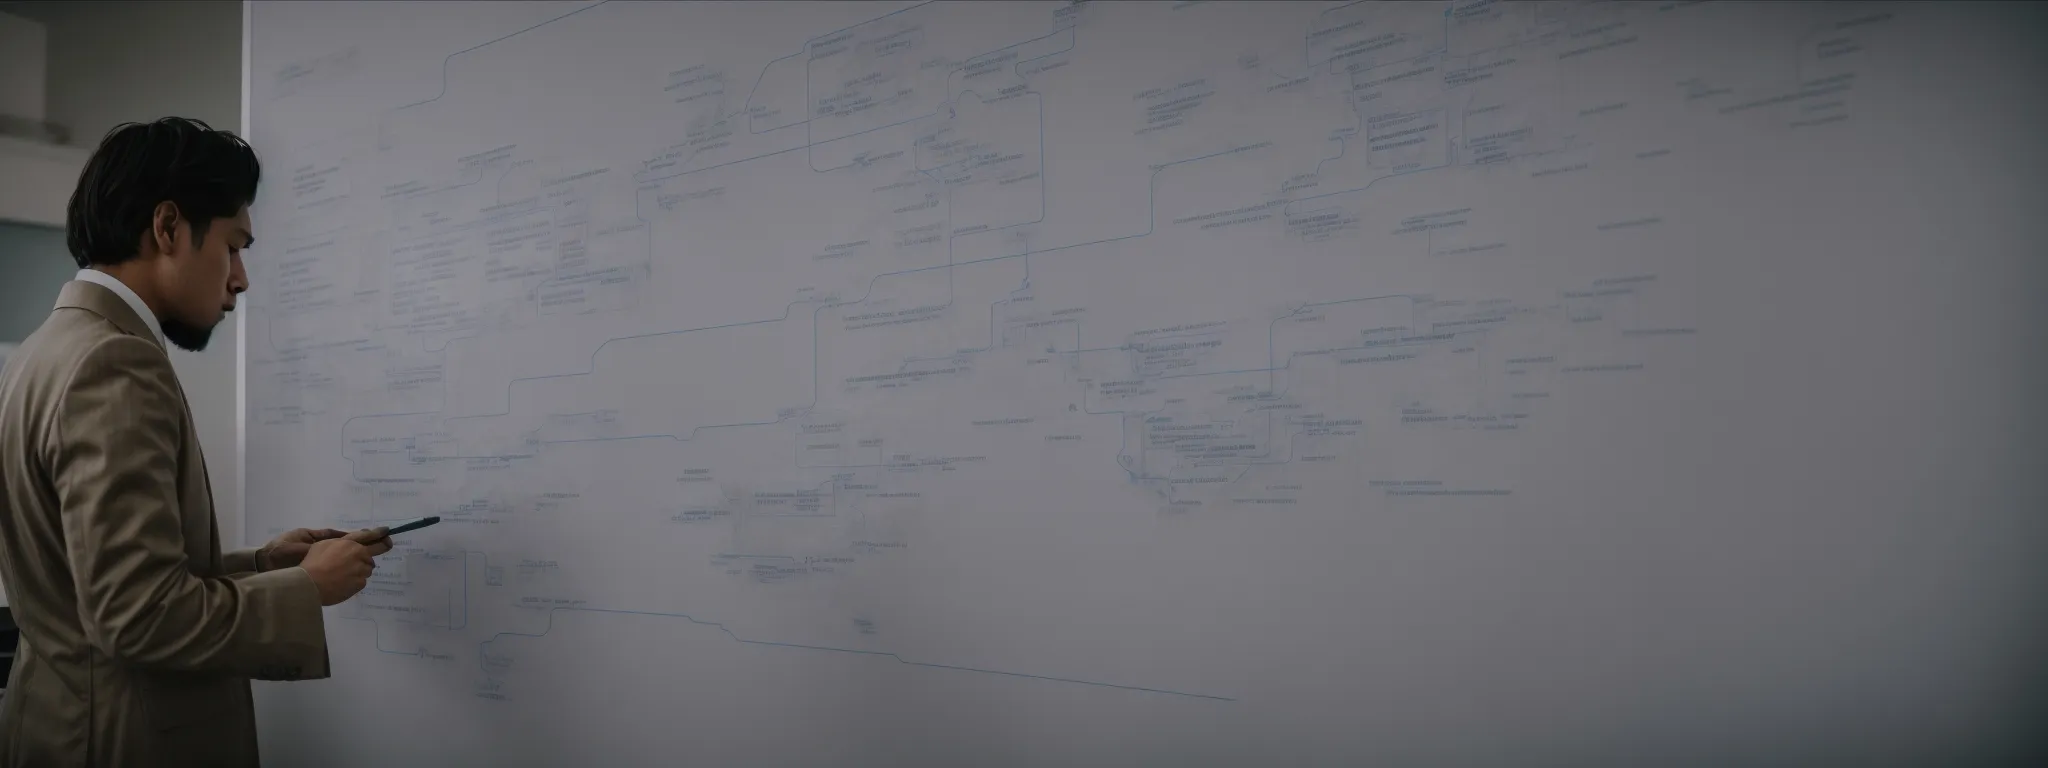 a person in an office reviewing a large flow chart of website navigation on a whiteboard.